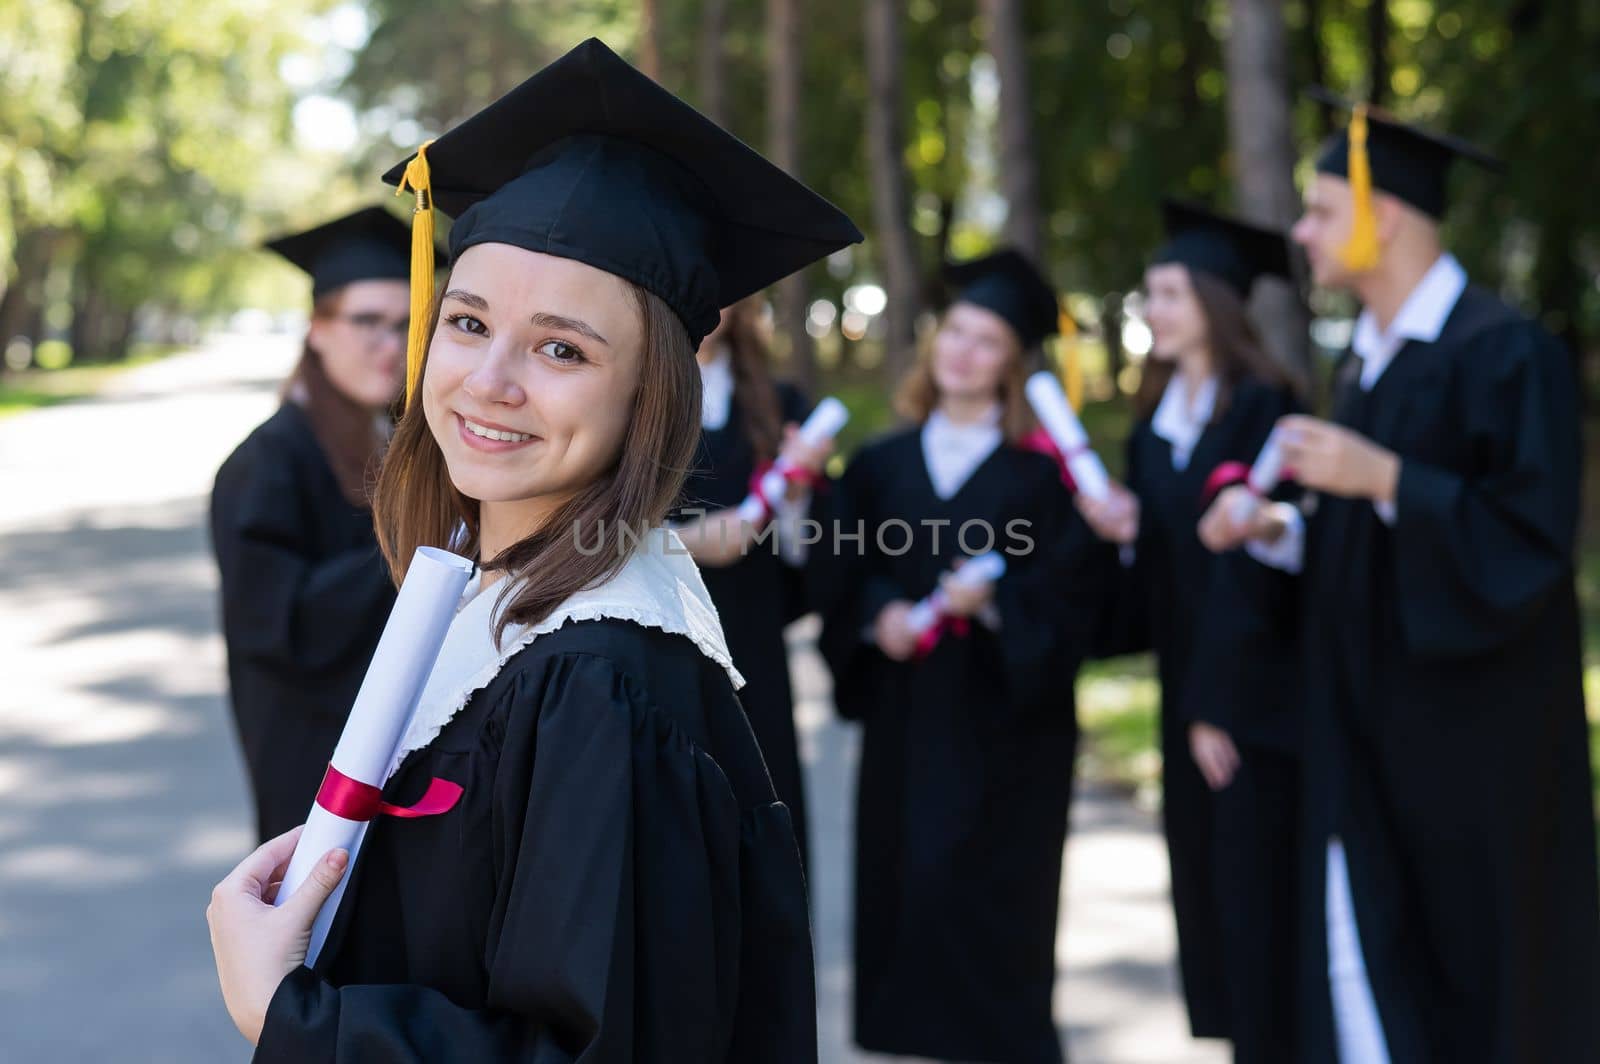 Group of happy students in graduation gowns outdoors. A young girl is happy to receive her diploma. by mrwed54